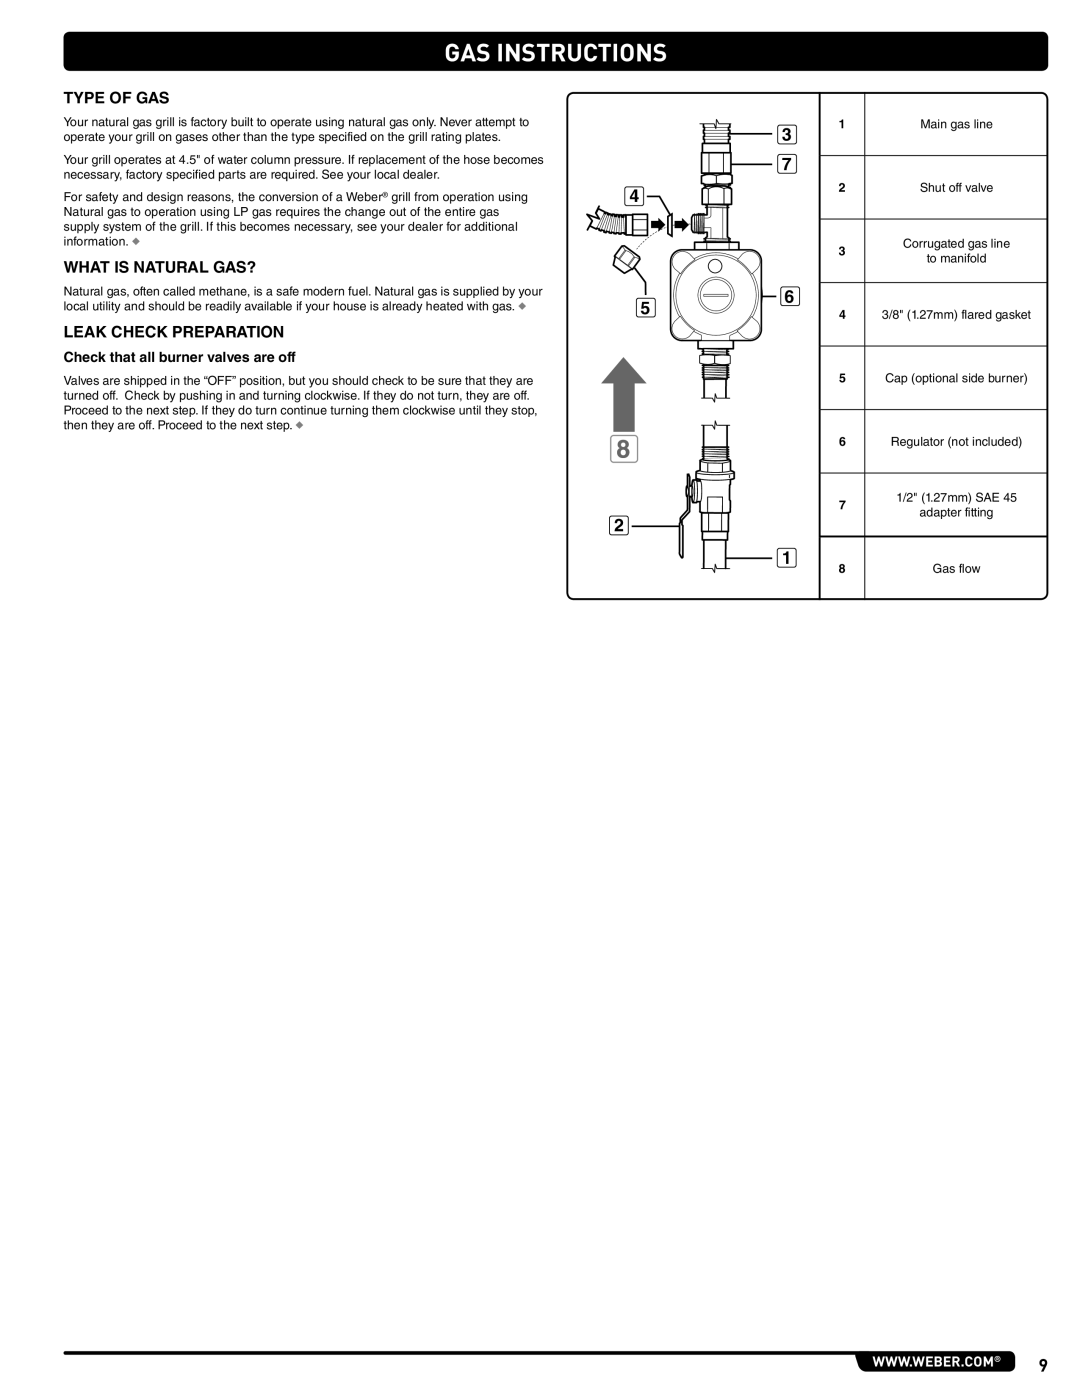 Weber 56576 manual Gas Instructions, Type Of Gas, What Is Natural Gas?, Leak Check Preparation 